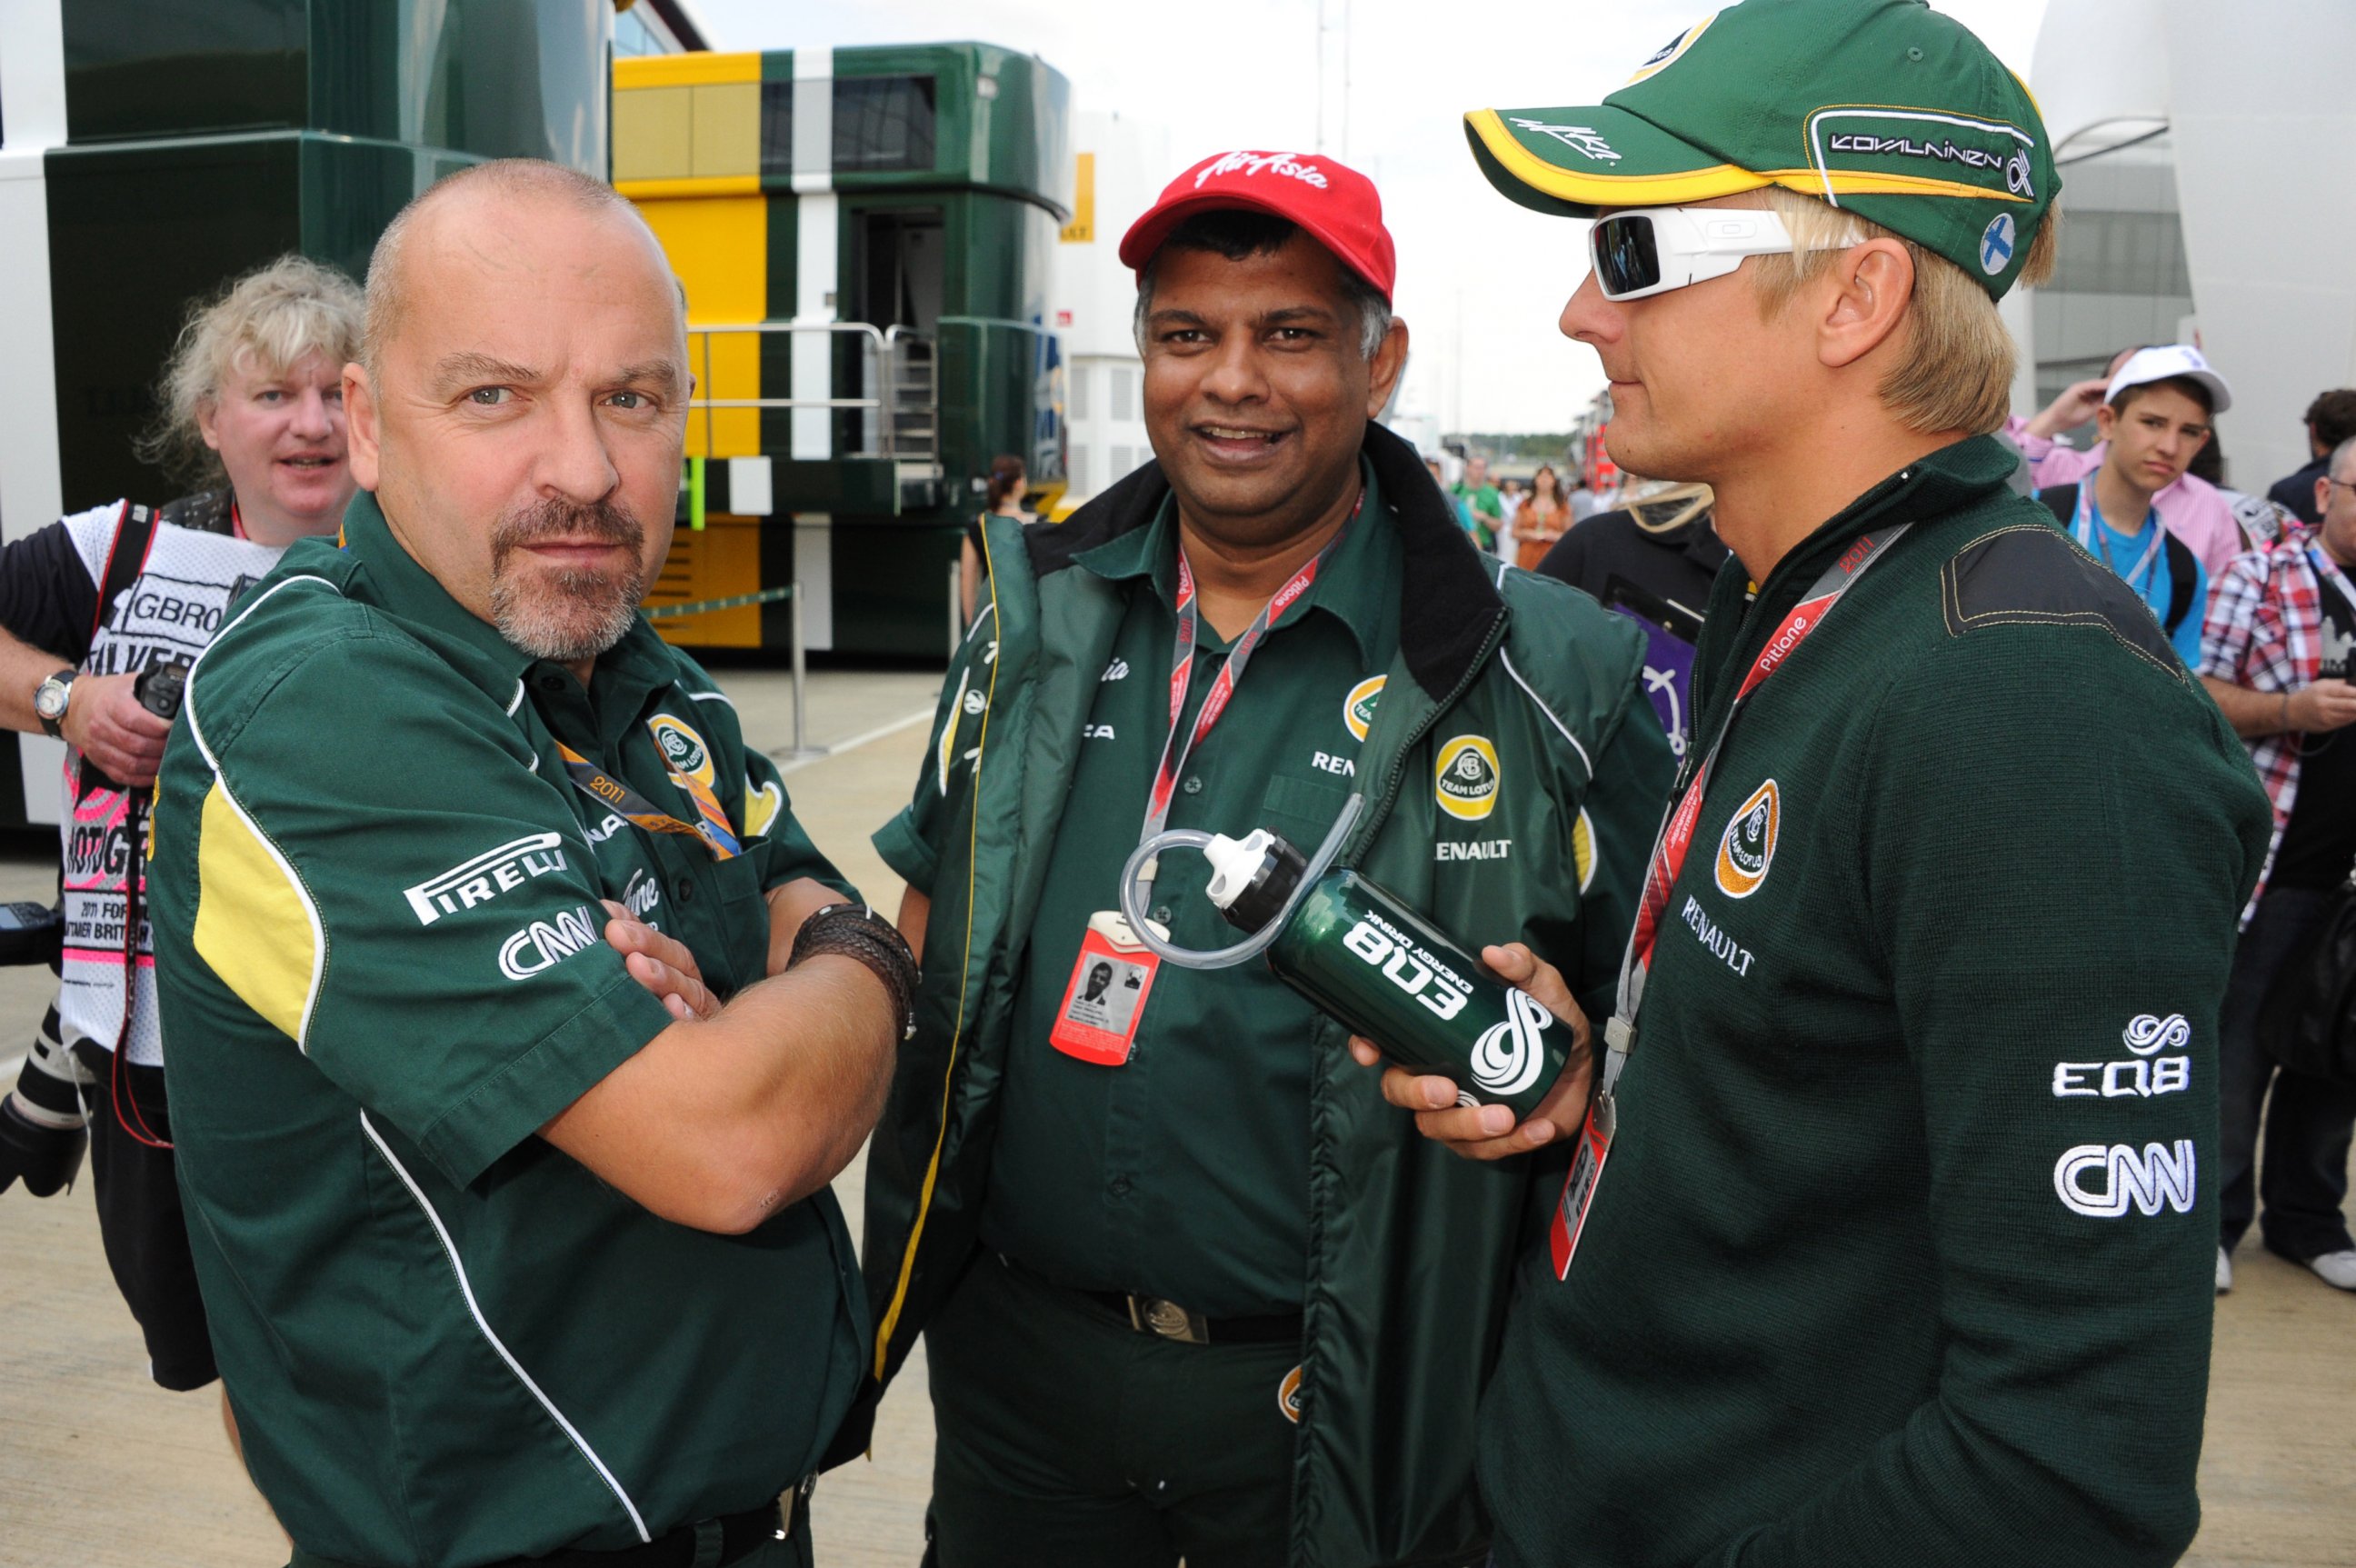 PHOTO: Mike Gascoyne, Tony Fernandes and Heikki Kovalainen at the British Formula One Grand Prix at the Silverstone Circuit on July 10, 2011 in Northampton, England. 